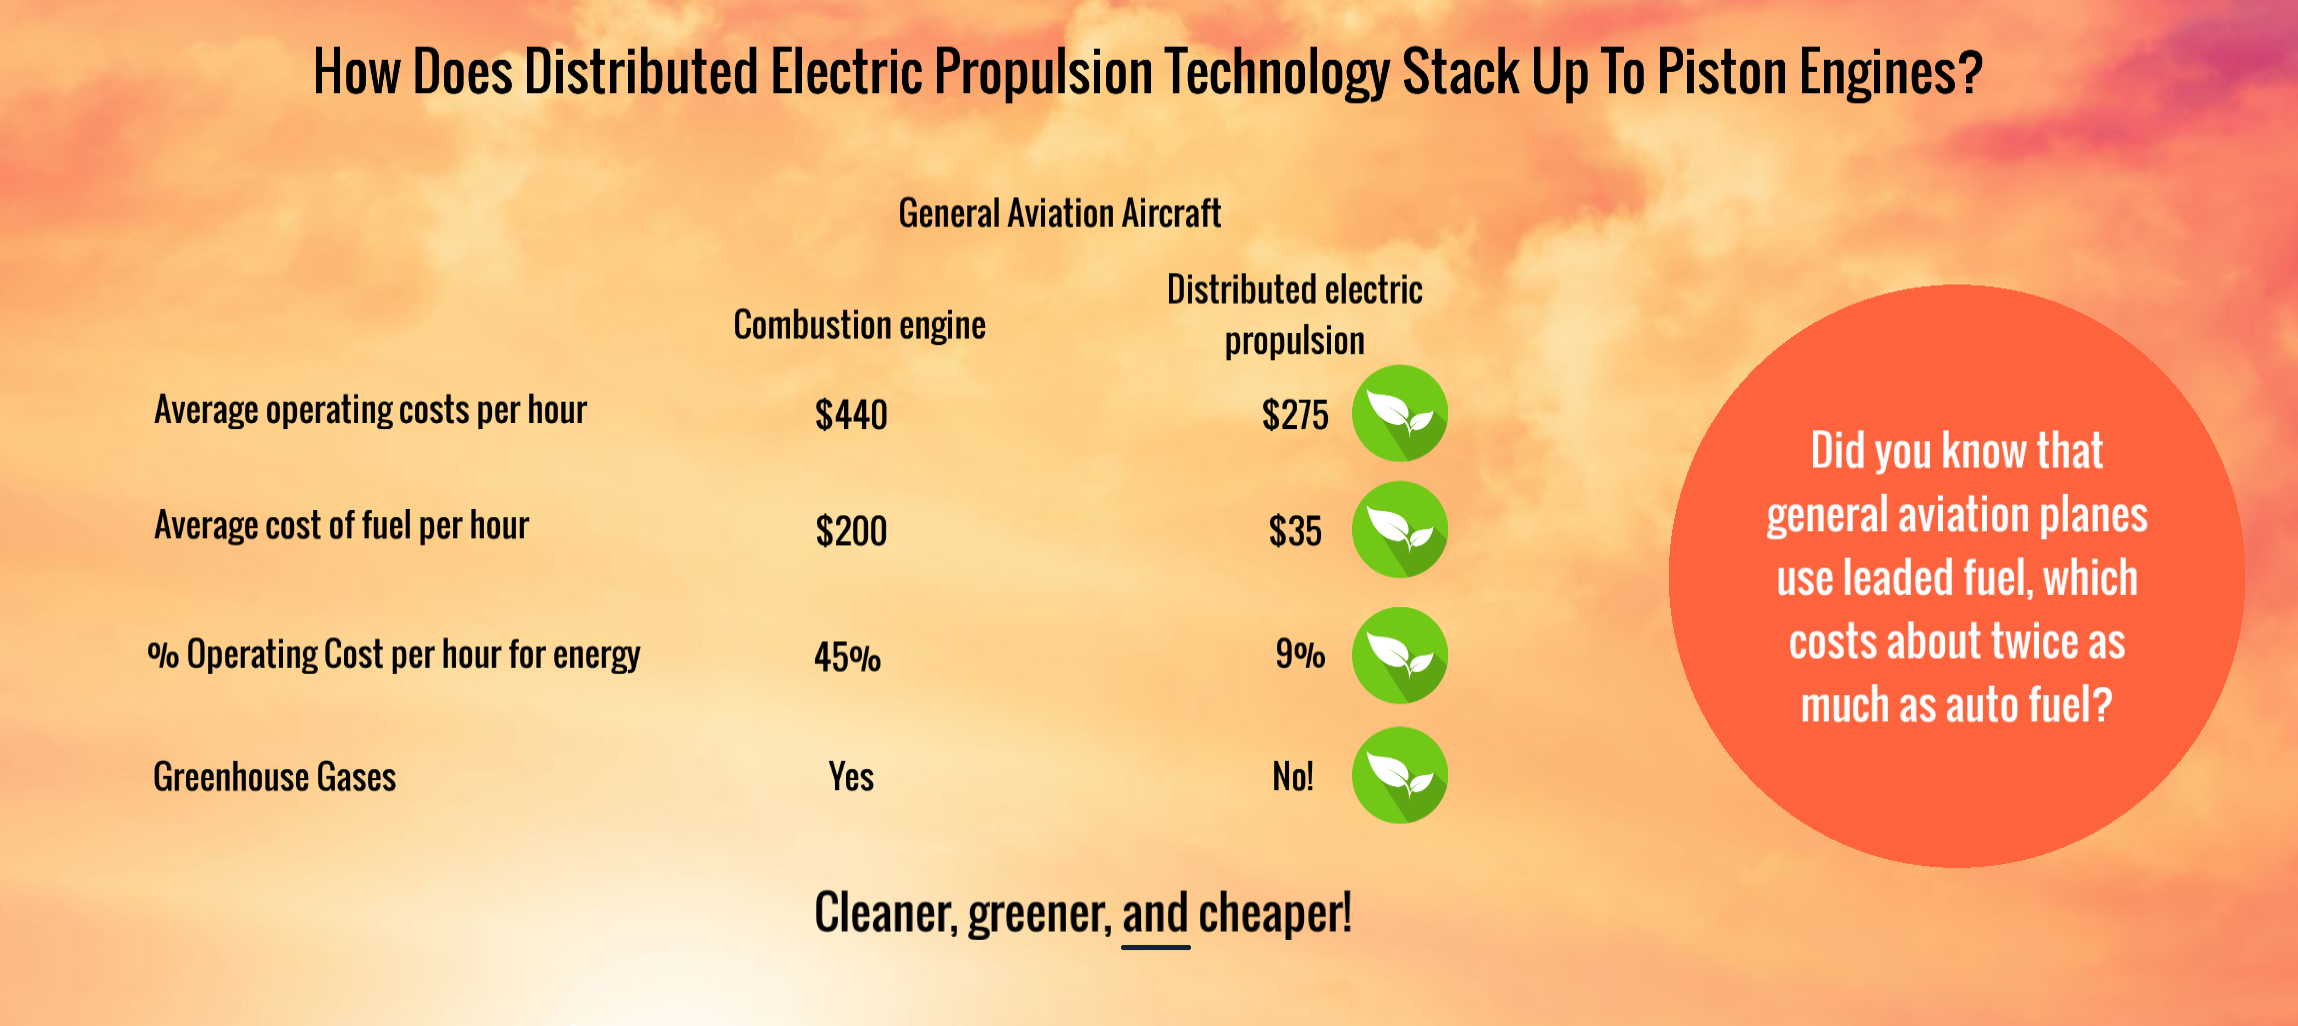 Chart showing how distributed electric propulsion technology stacks up to piston engines.